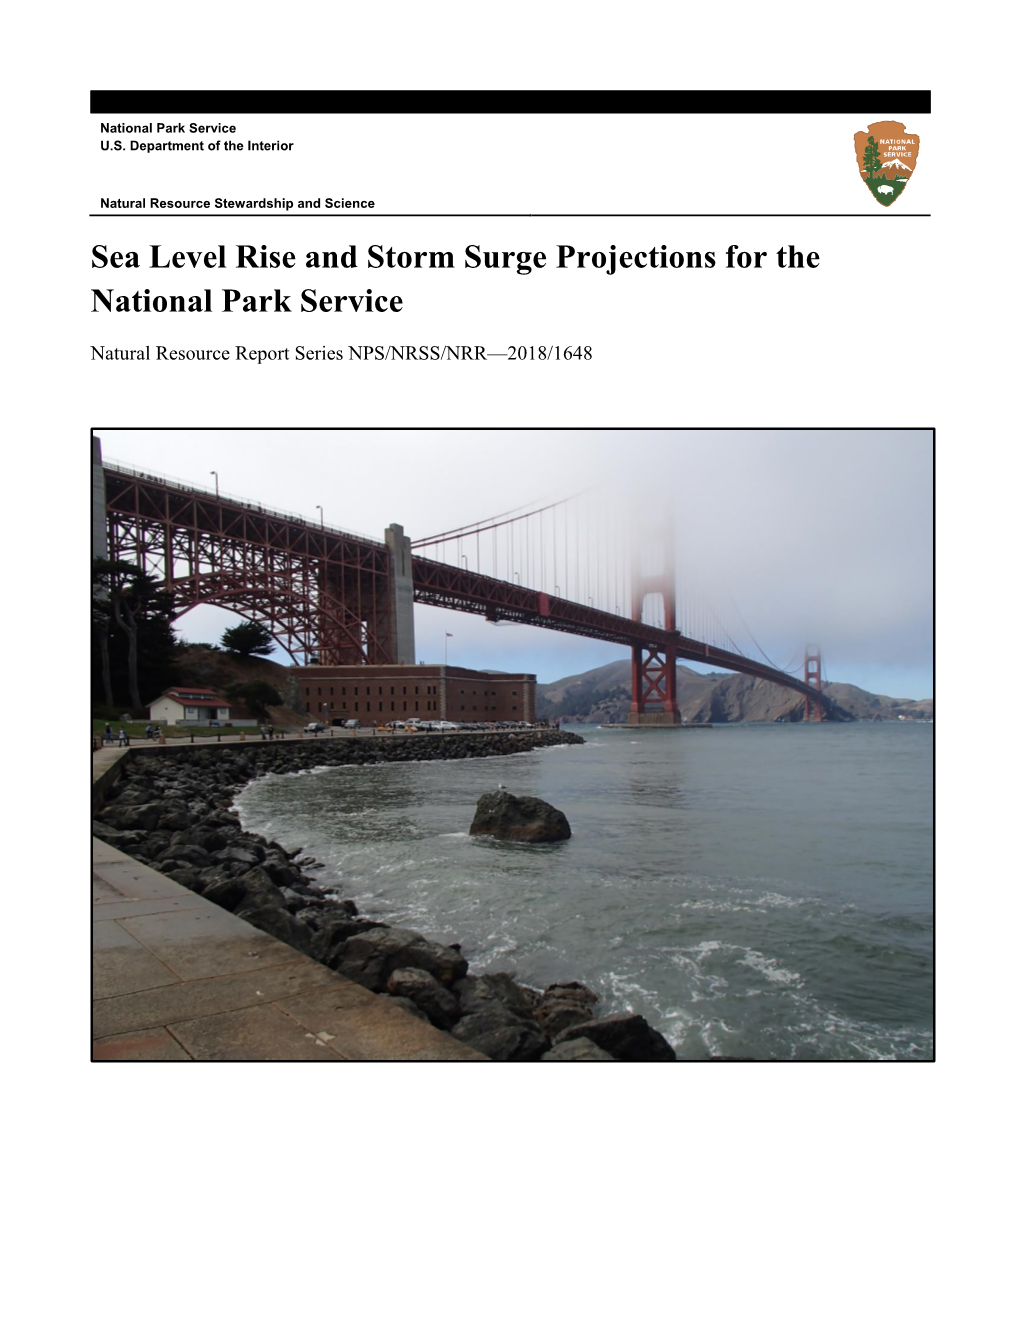 Sea Level Rise and Storm Surge Projections for the National Park Service